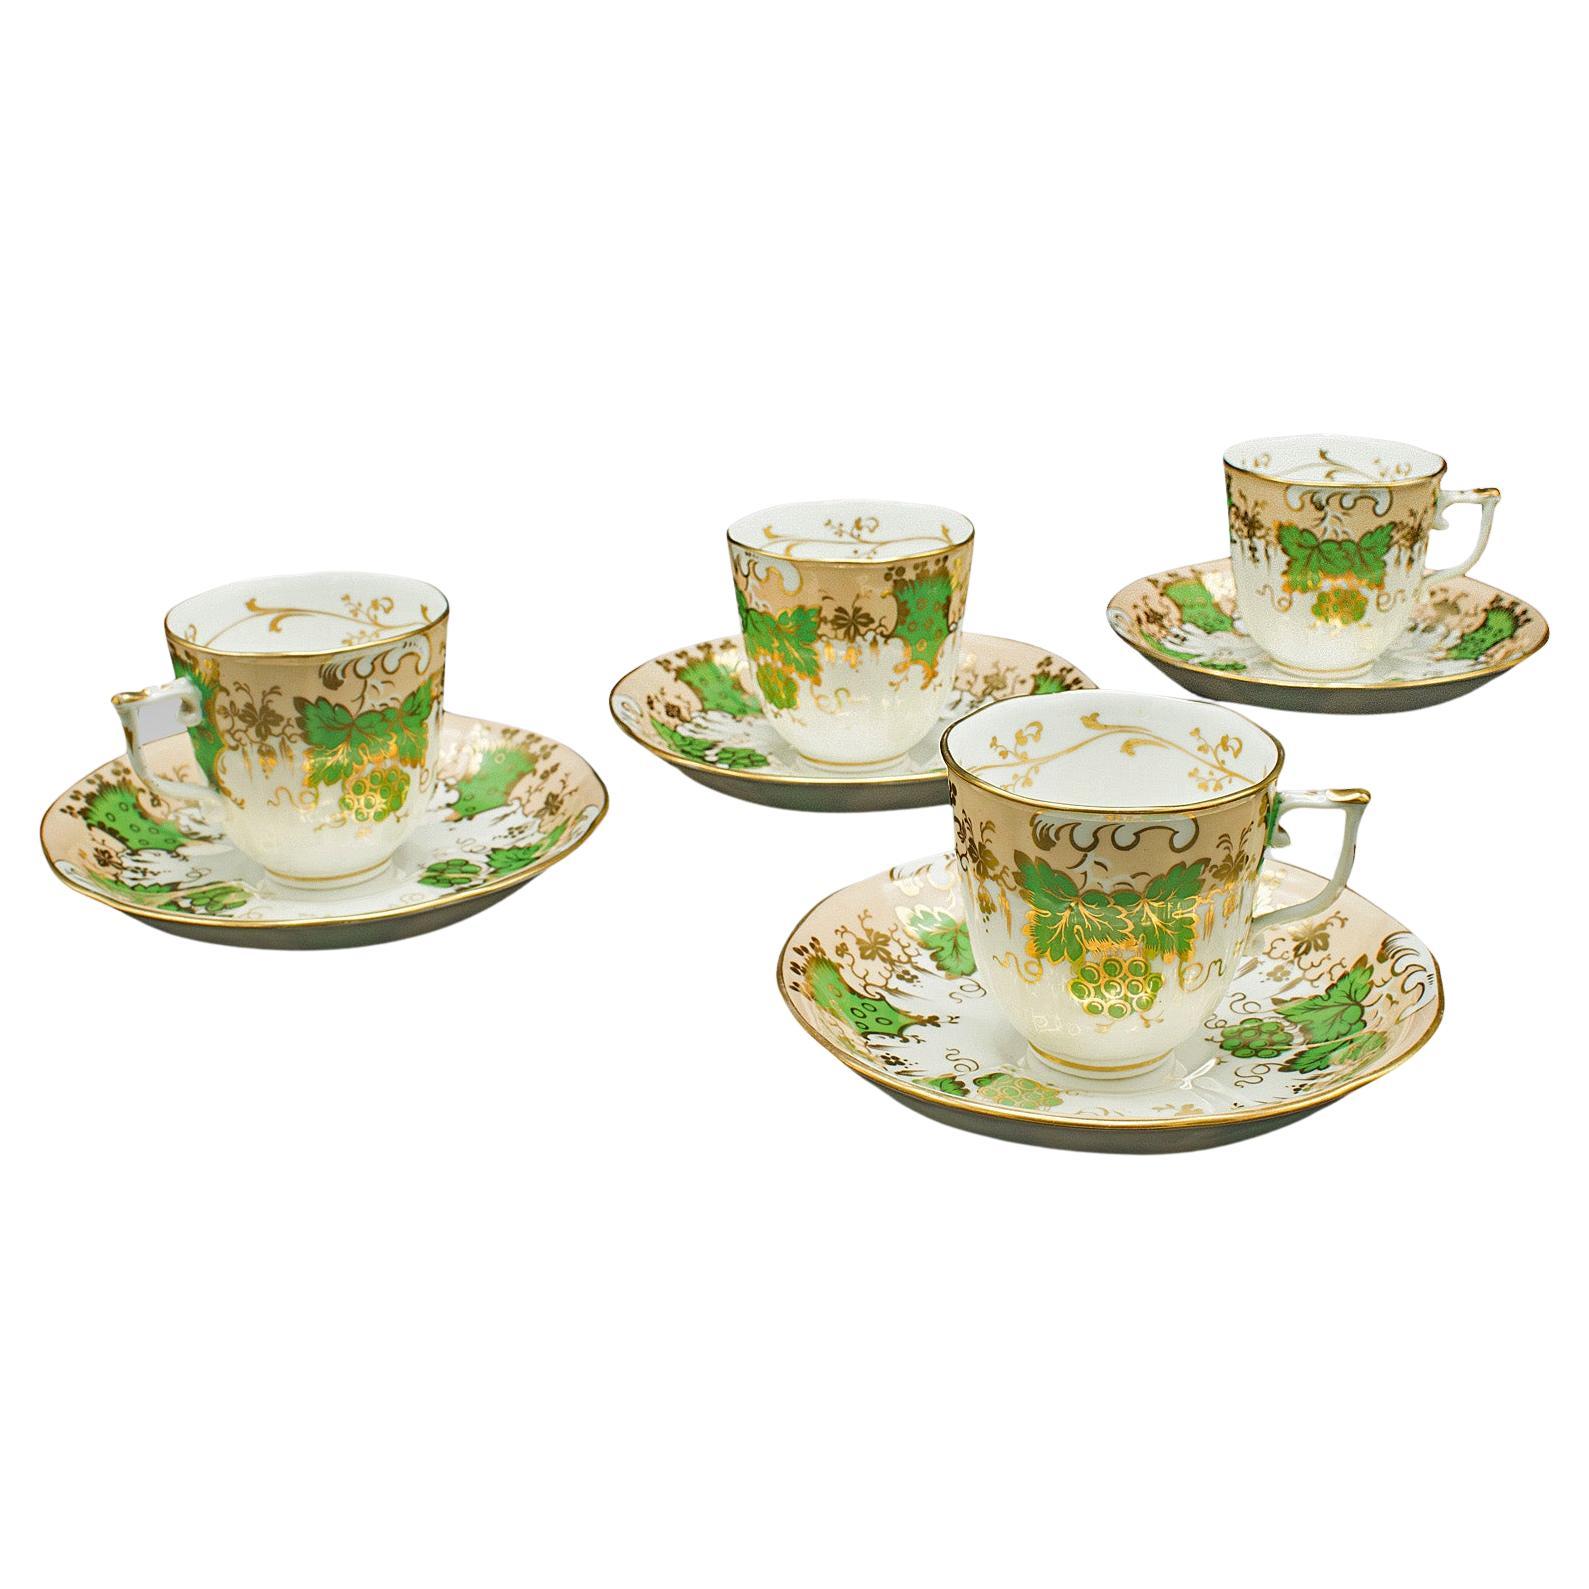 Set of 4 Antique Coffee Cups, English, Bone China, Cup and Saucer, Victorian